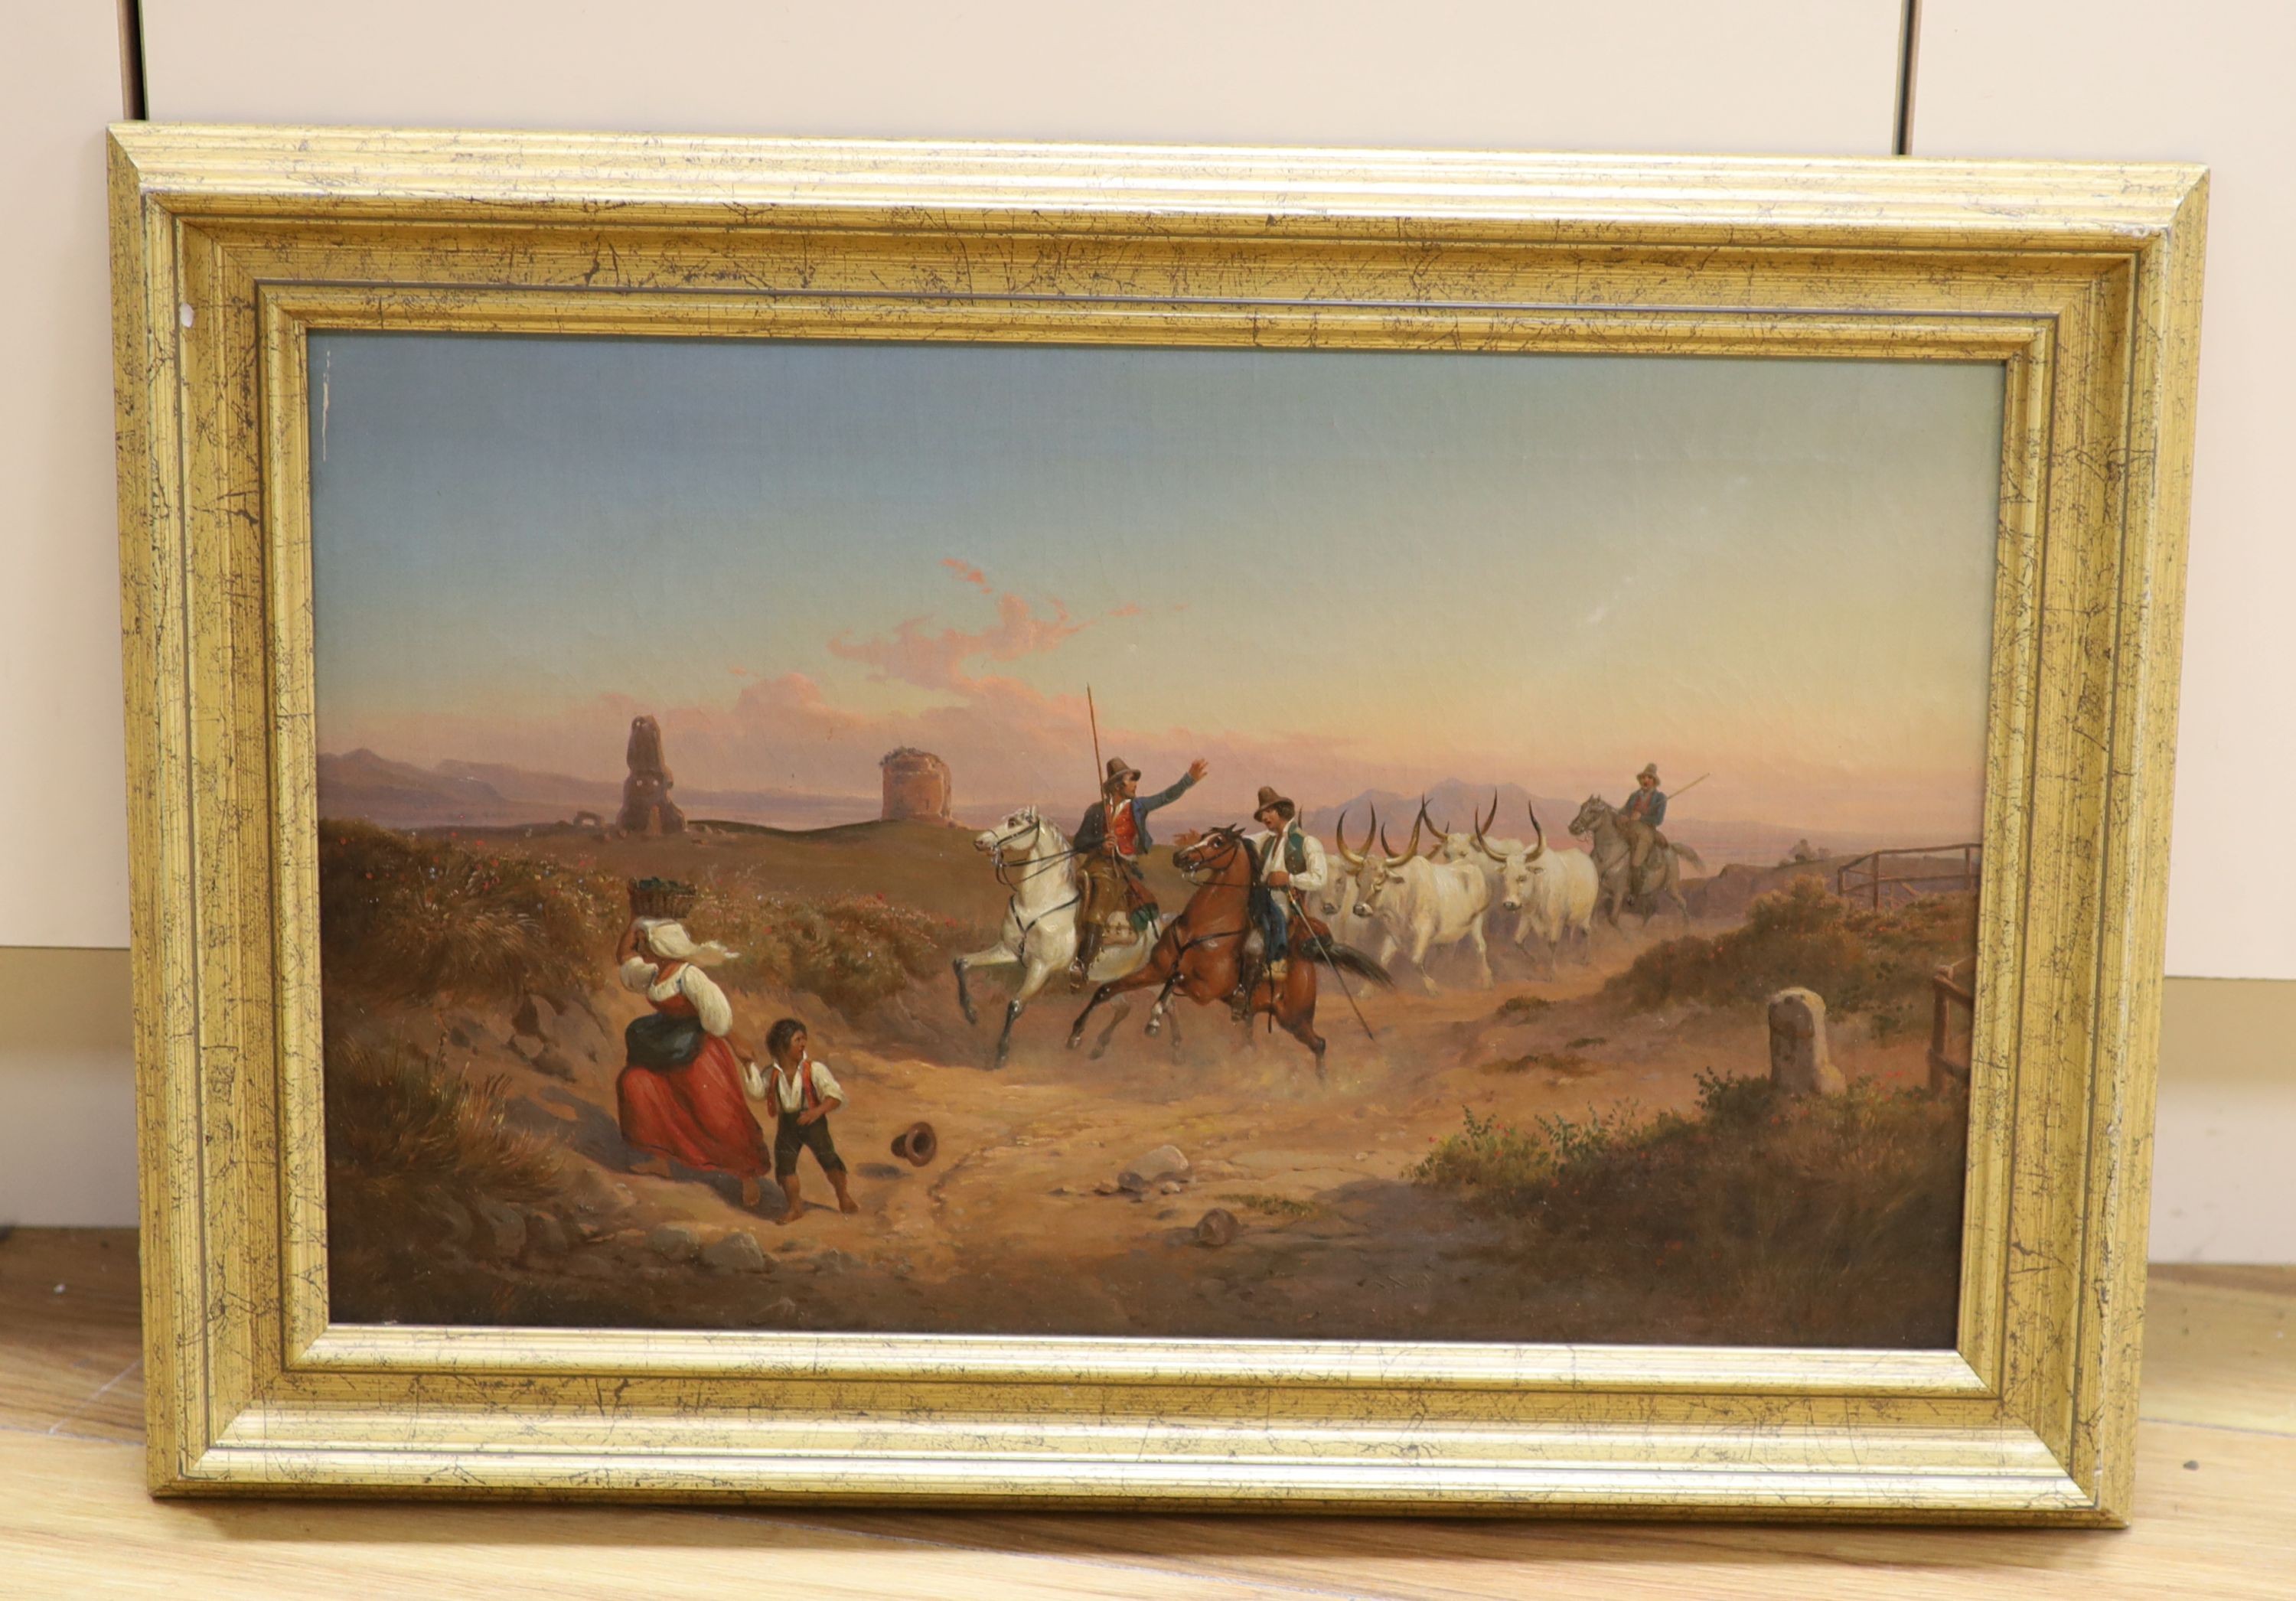 Ludwig Vogel (1788-1879) Swiss. Cattle herders, oil on canvas, signed and inscribed 'Roma, 1850' verso, 12